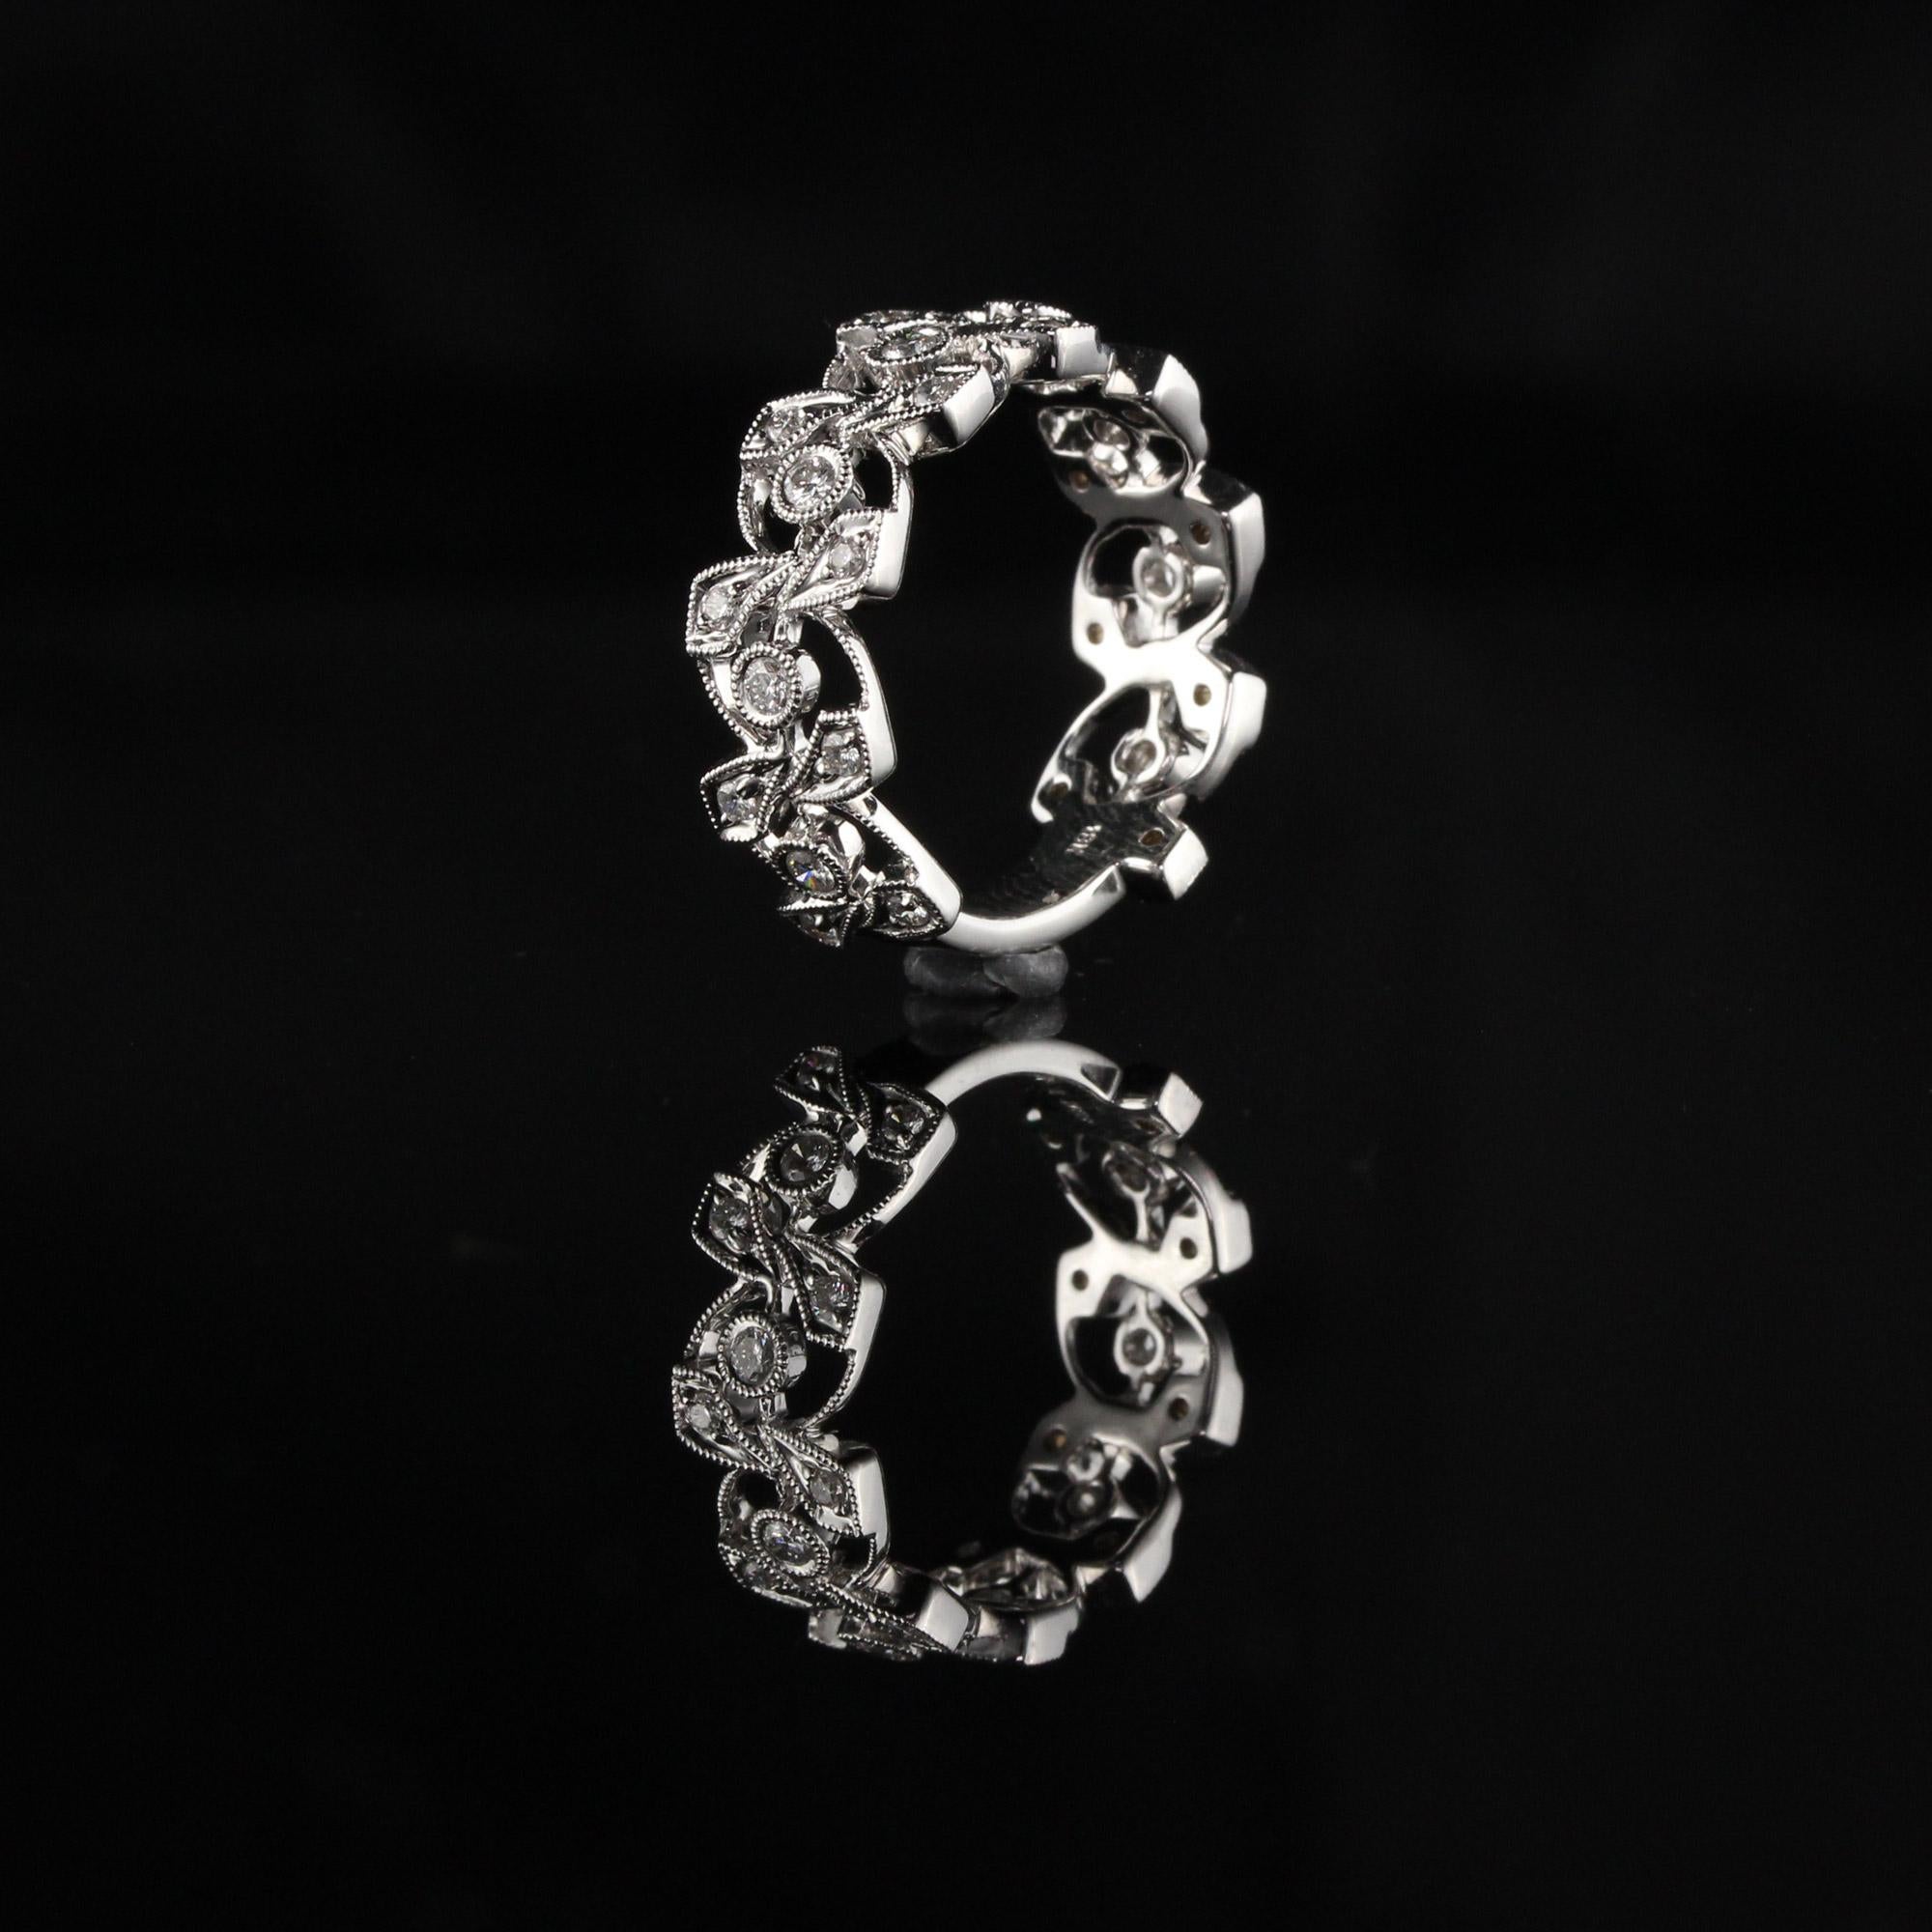 Vintage Estate 18 Karat White Gold Diamond Ring In Excellent Condition For Sale In Great Neck, NY